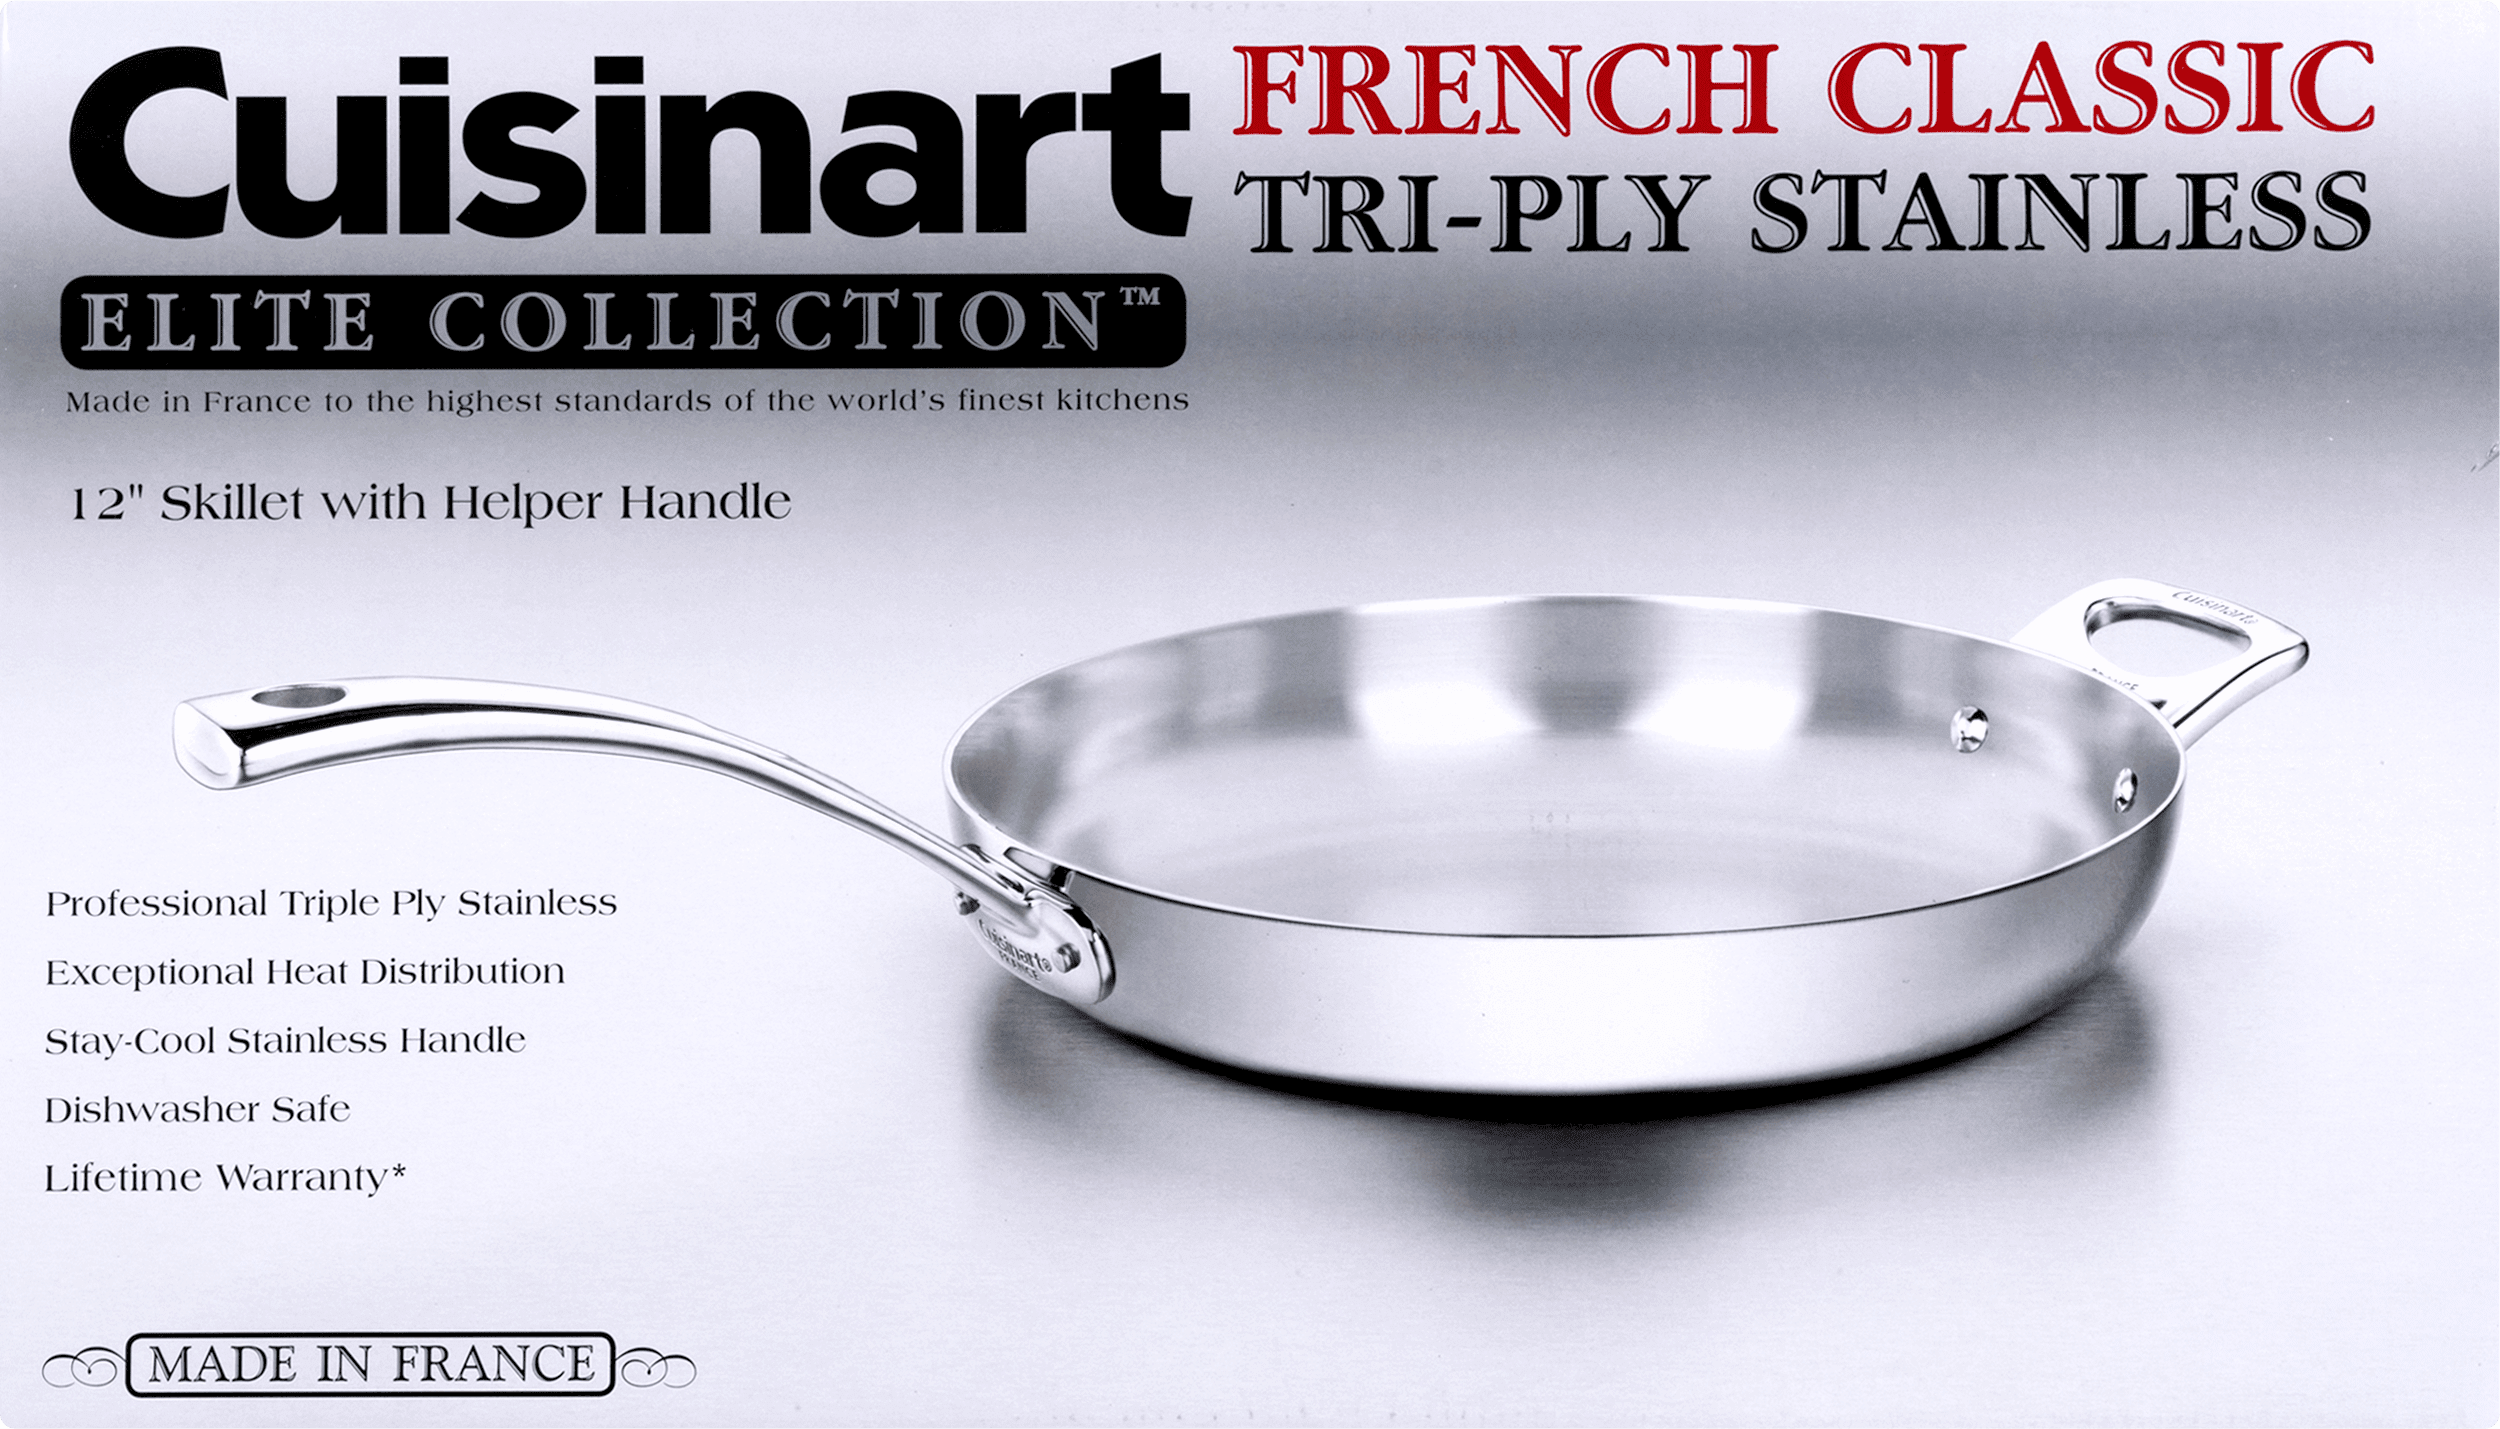 Cuisinart French Classic Tri-Ply Stainless Steel Cookware Review - Consumer  Reports